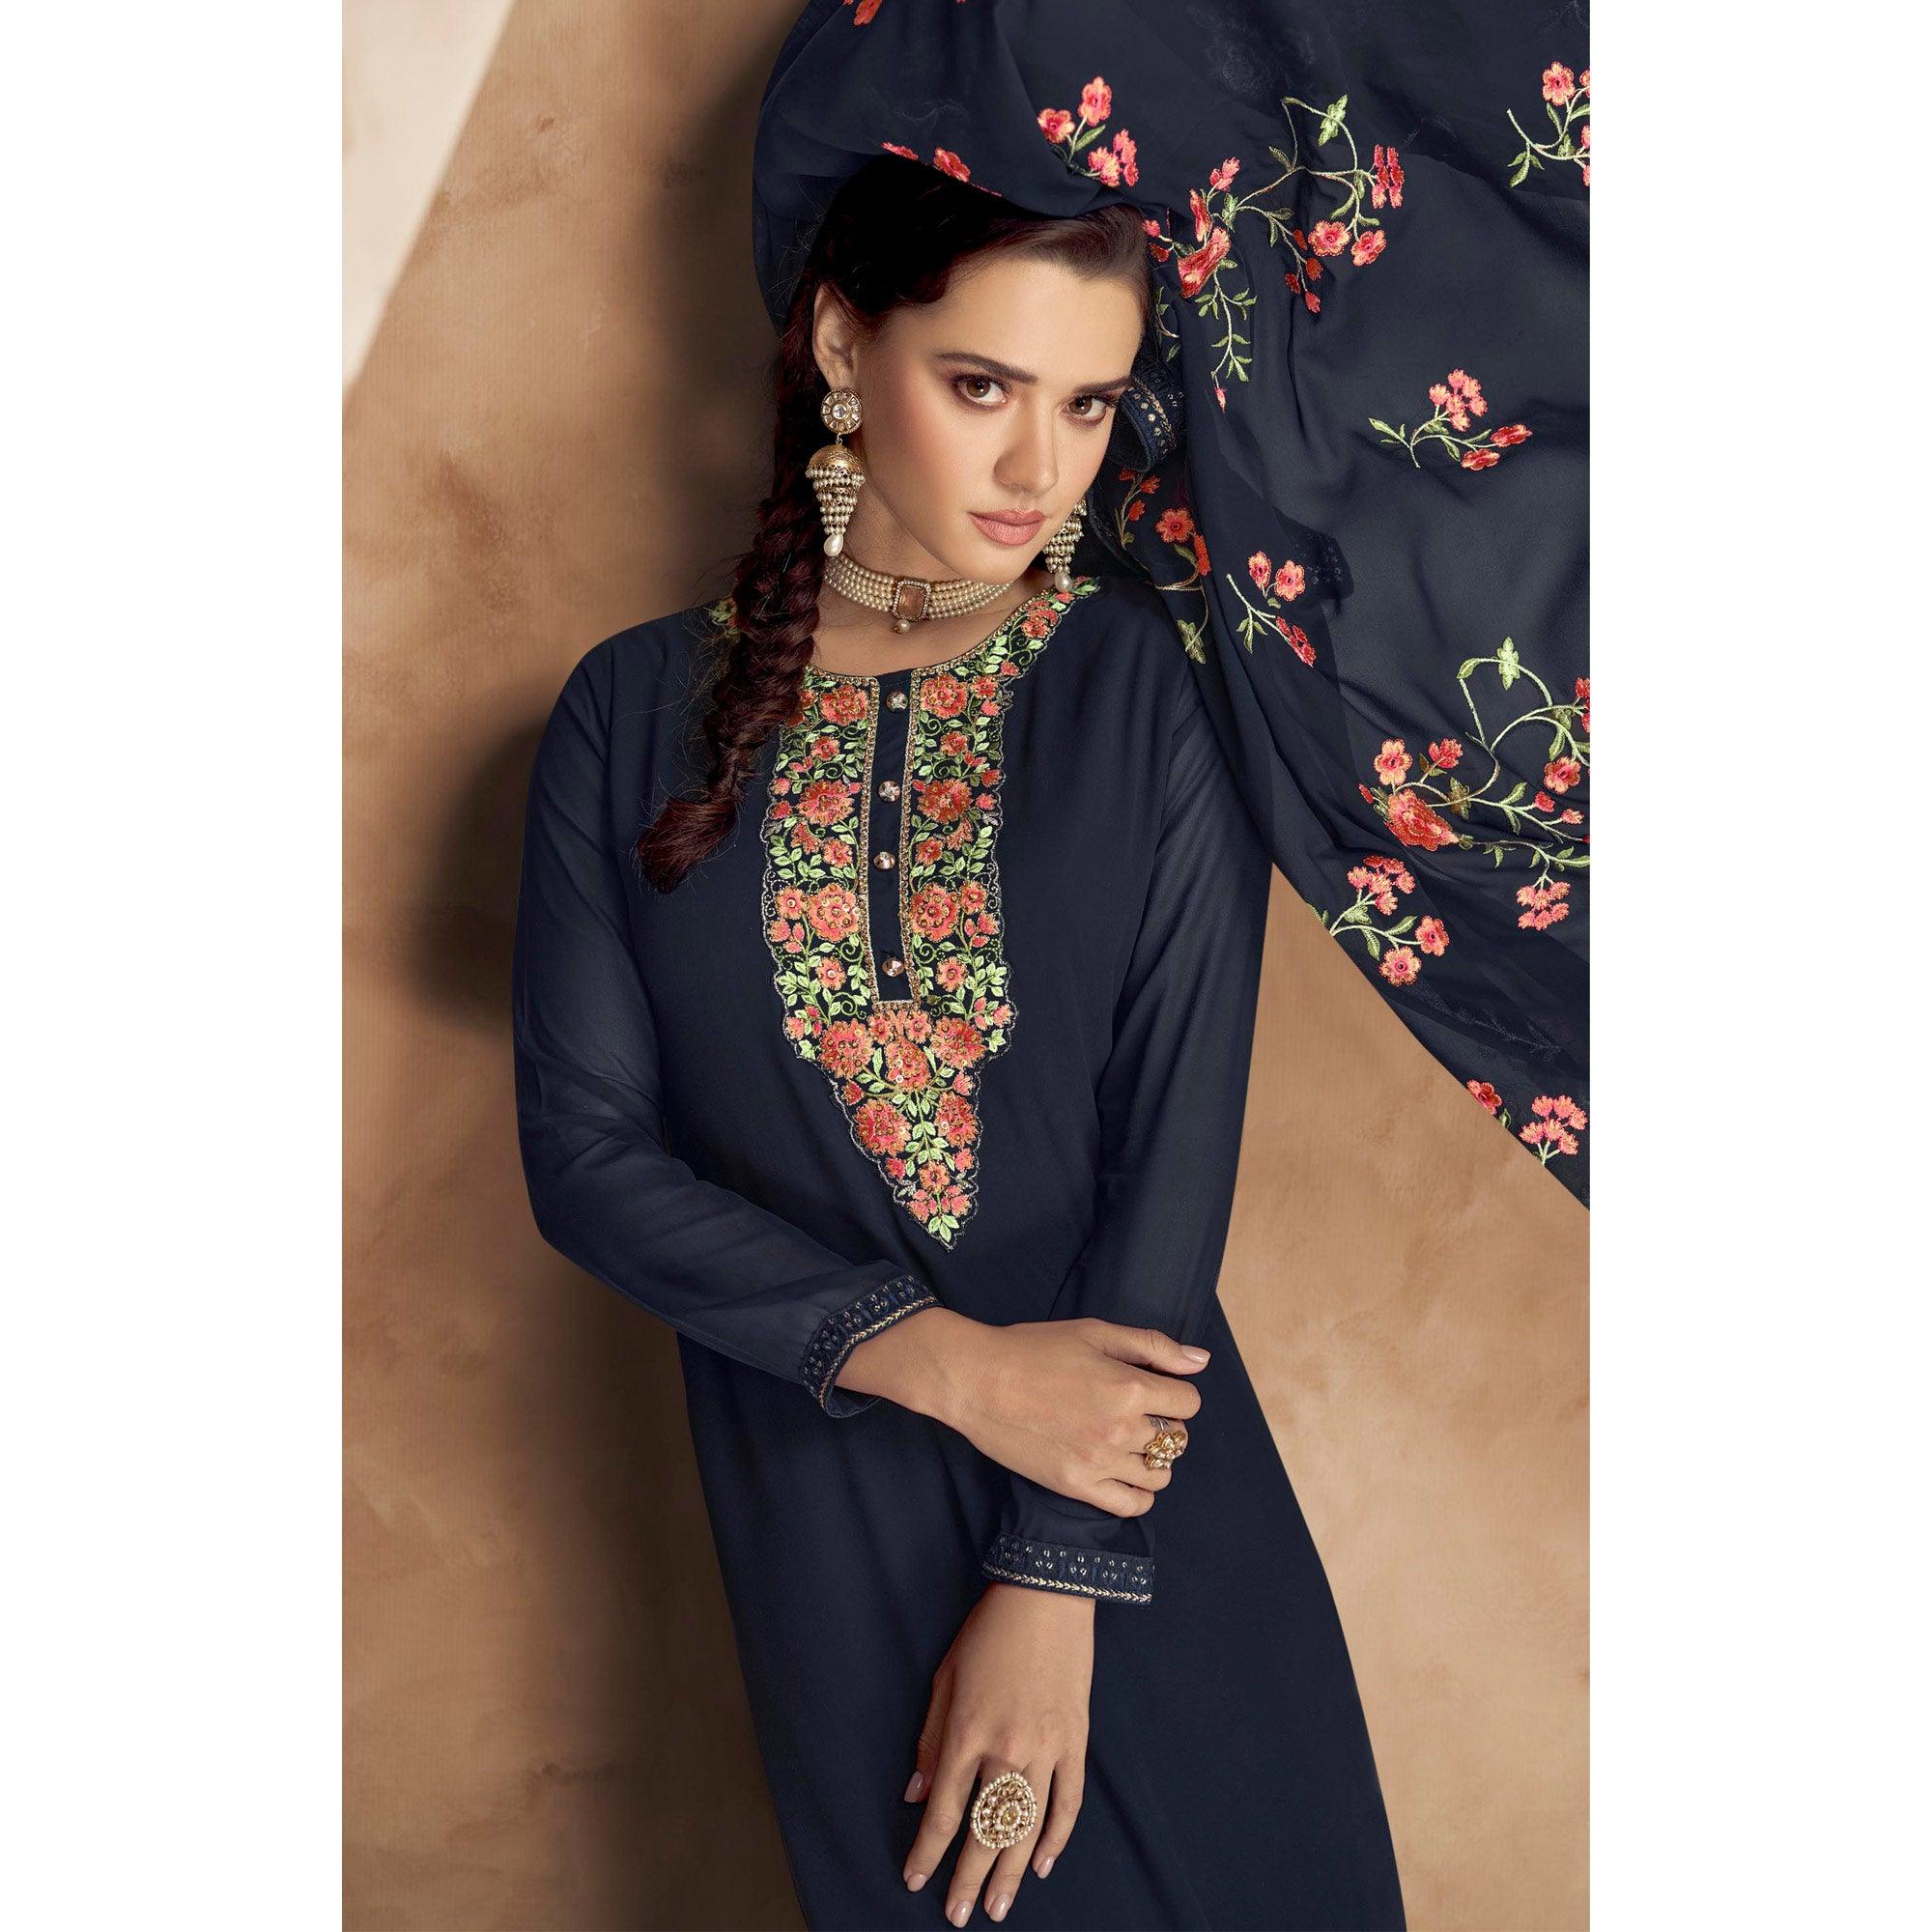 Blue Embellished Partywear Embroidered Heavy Faux Georgette Suit - Peachmode